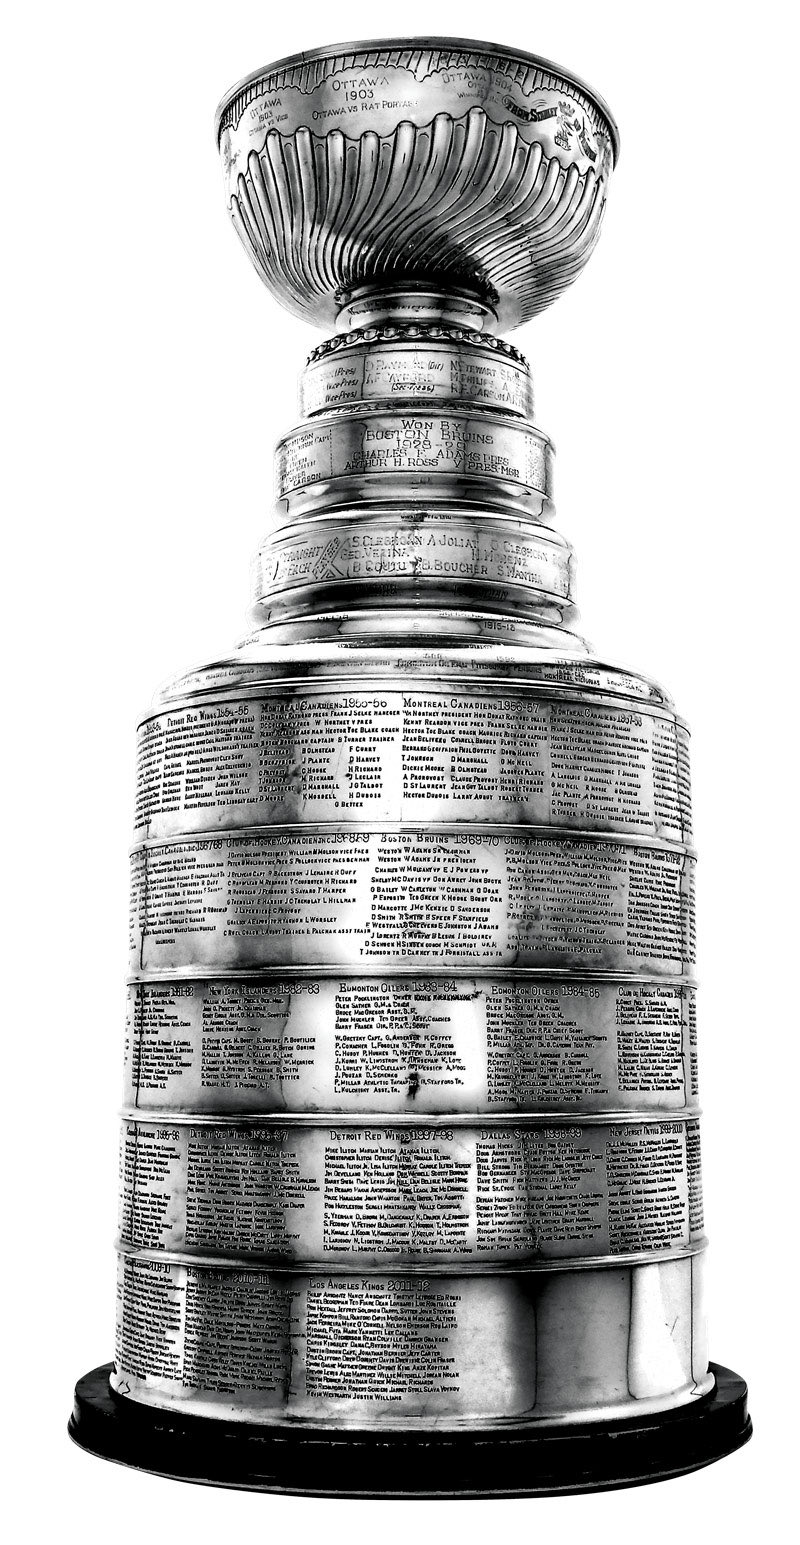 Running out of room & going to need to order a new stanley #stanleycup